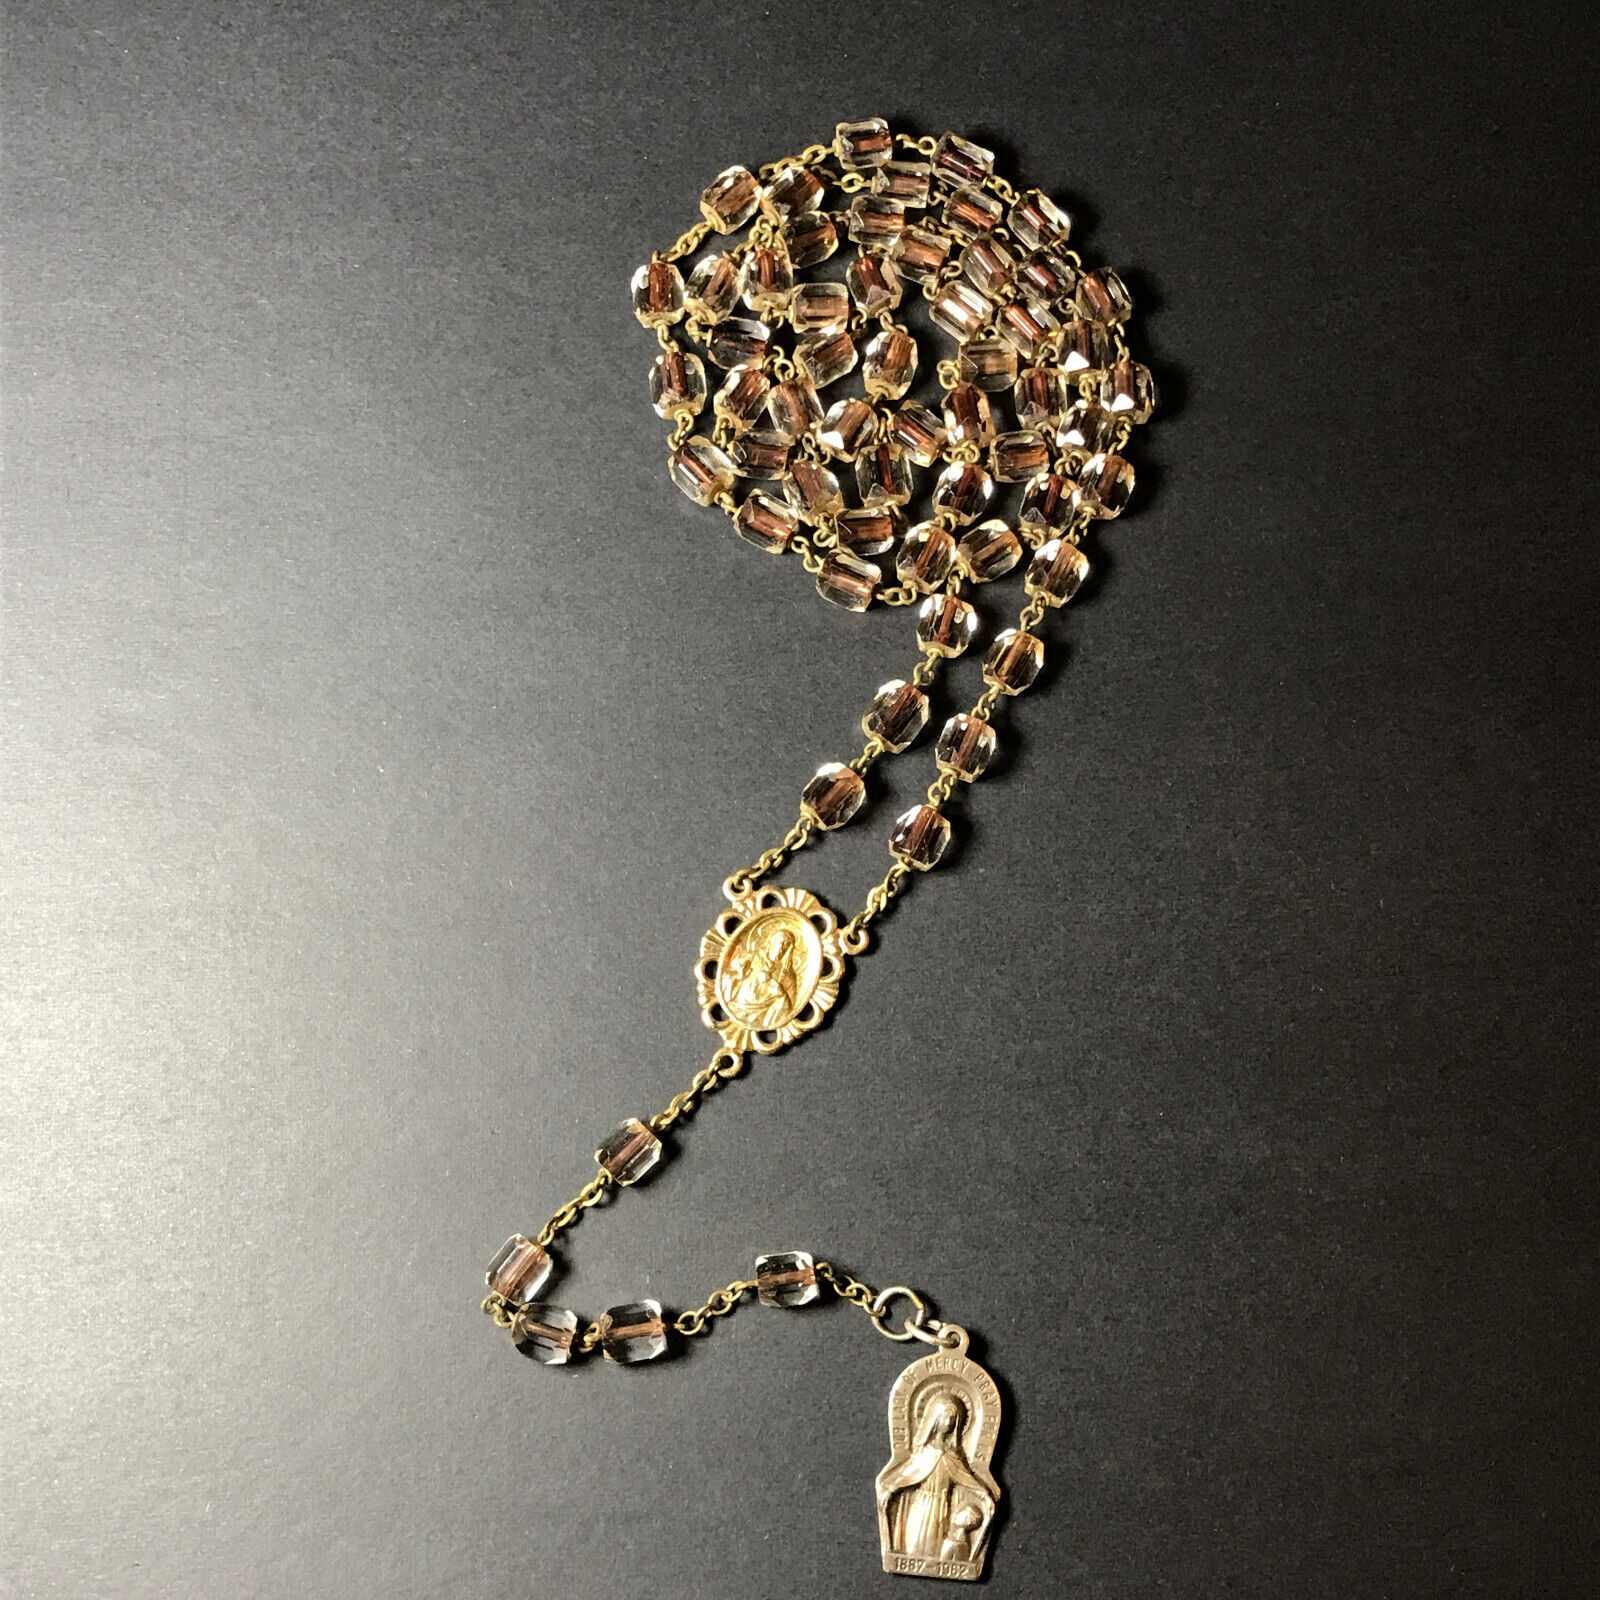 VTG Rosary Glass Beads Mission Our Lady Of Mercy 1887-1962 Chicago Made Italy